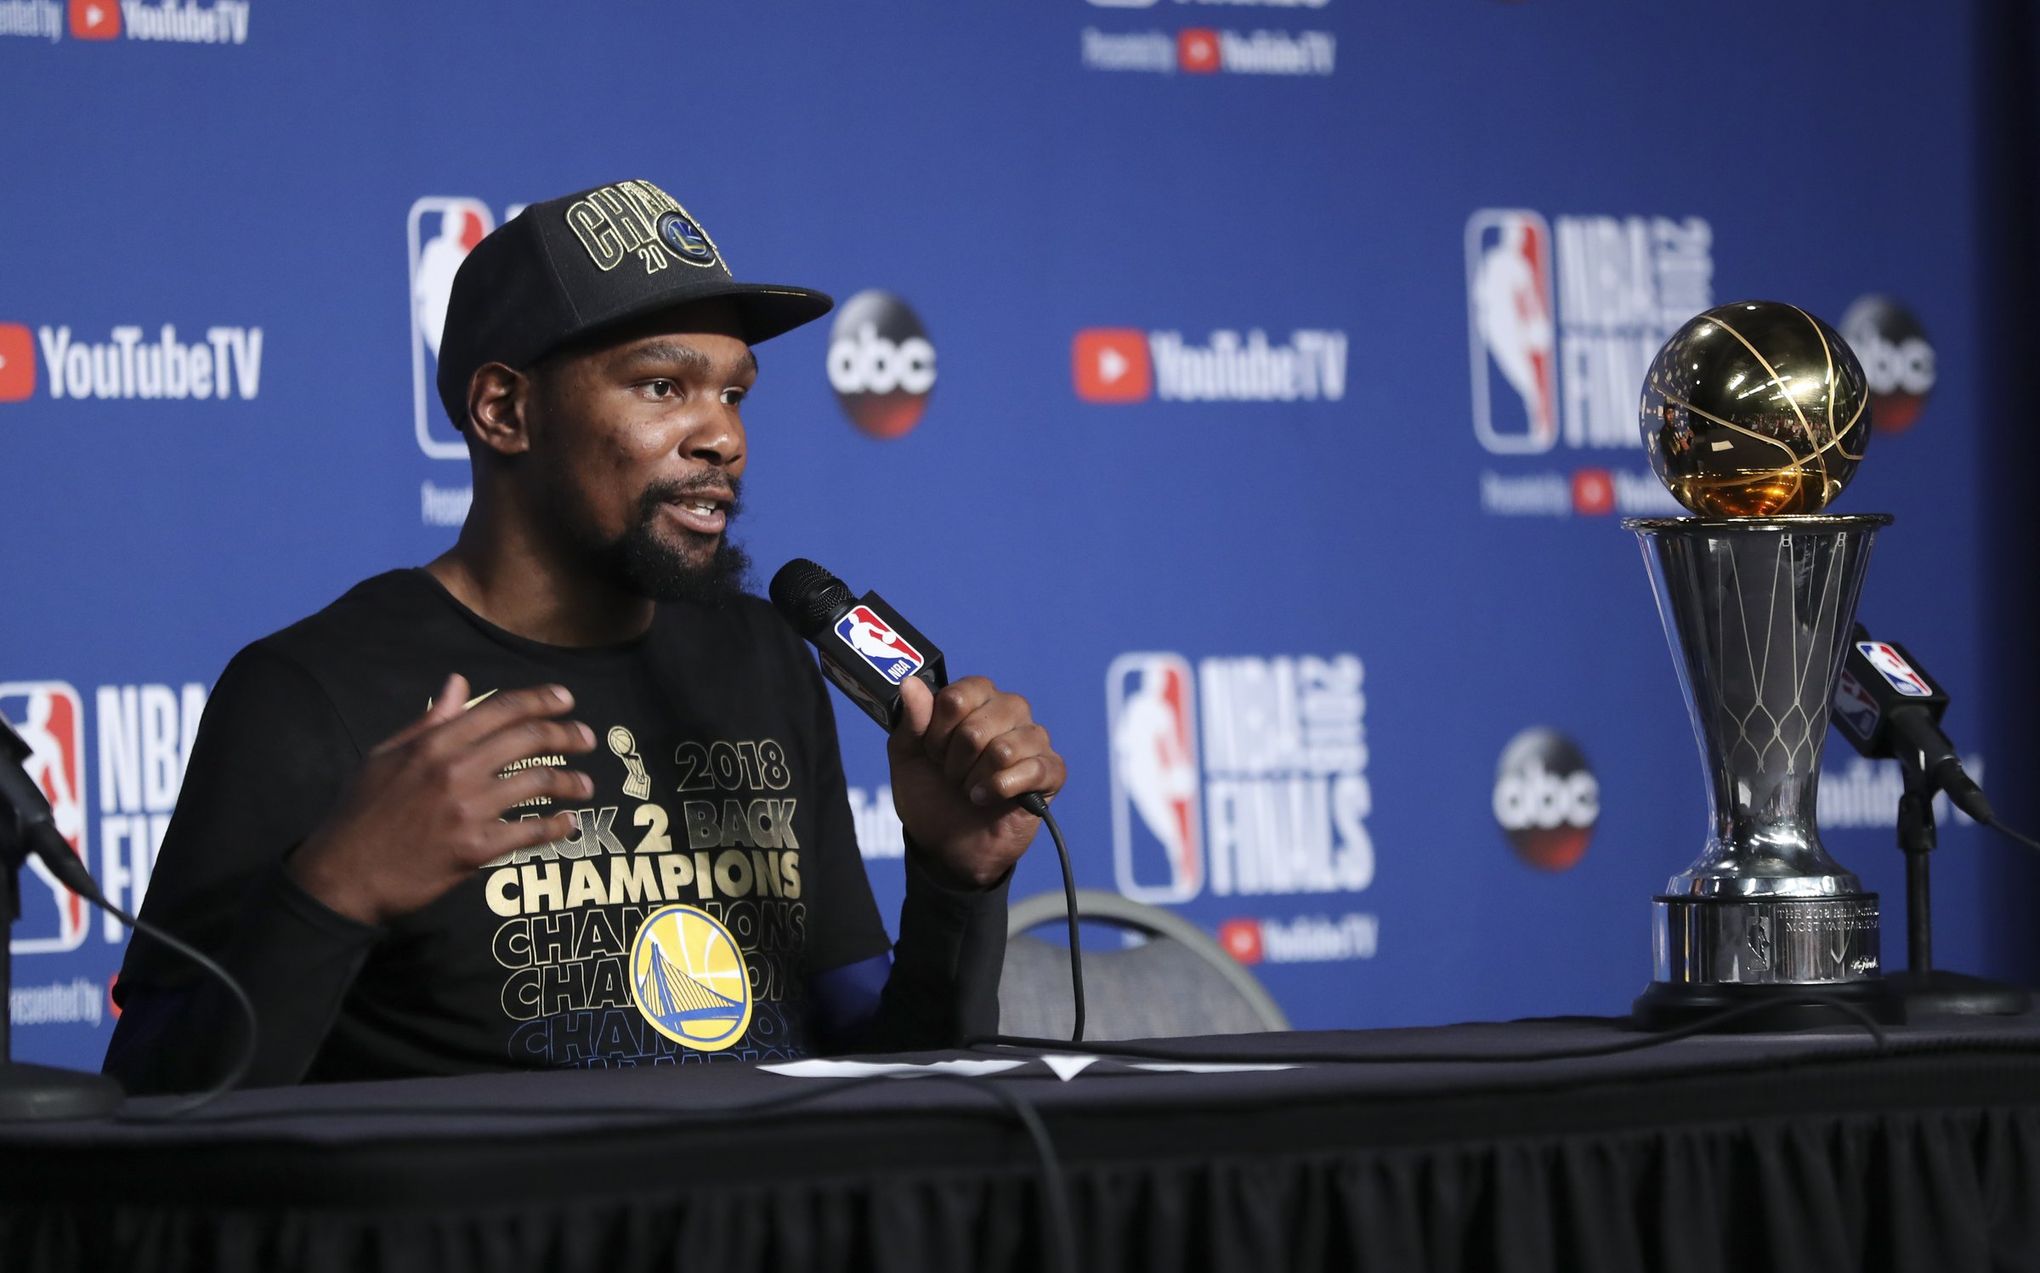 Kevin Durant can get a massive payday and keep winning titles